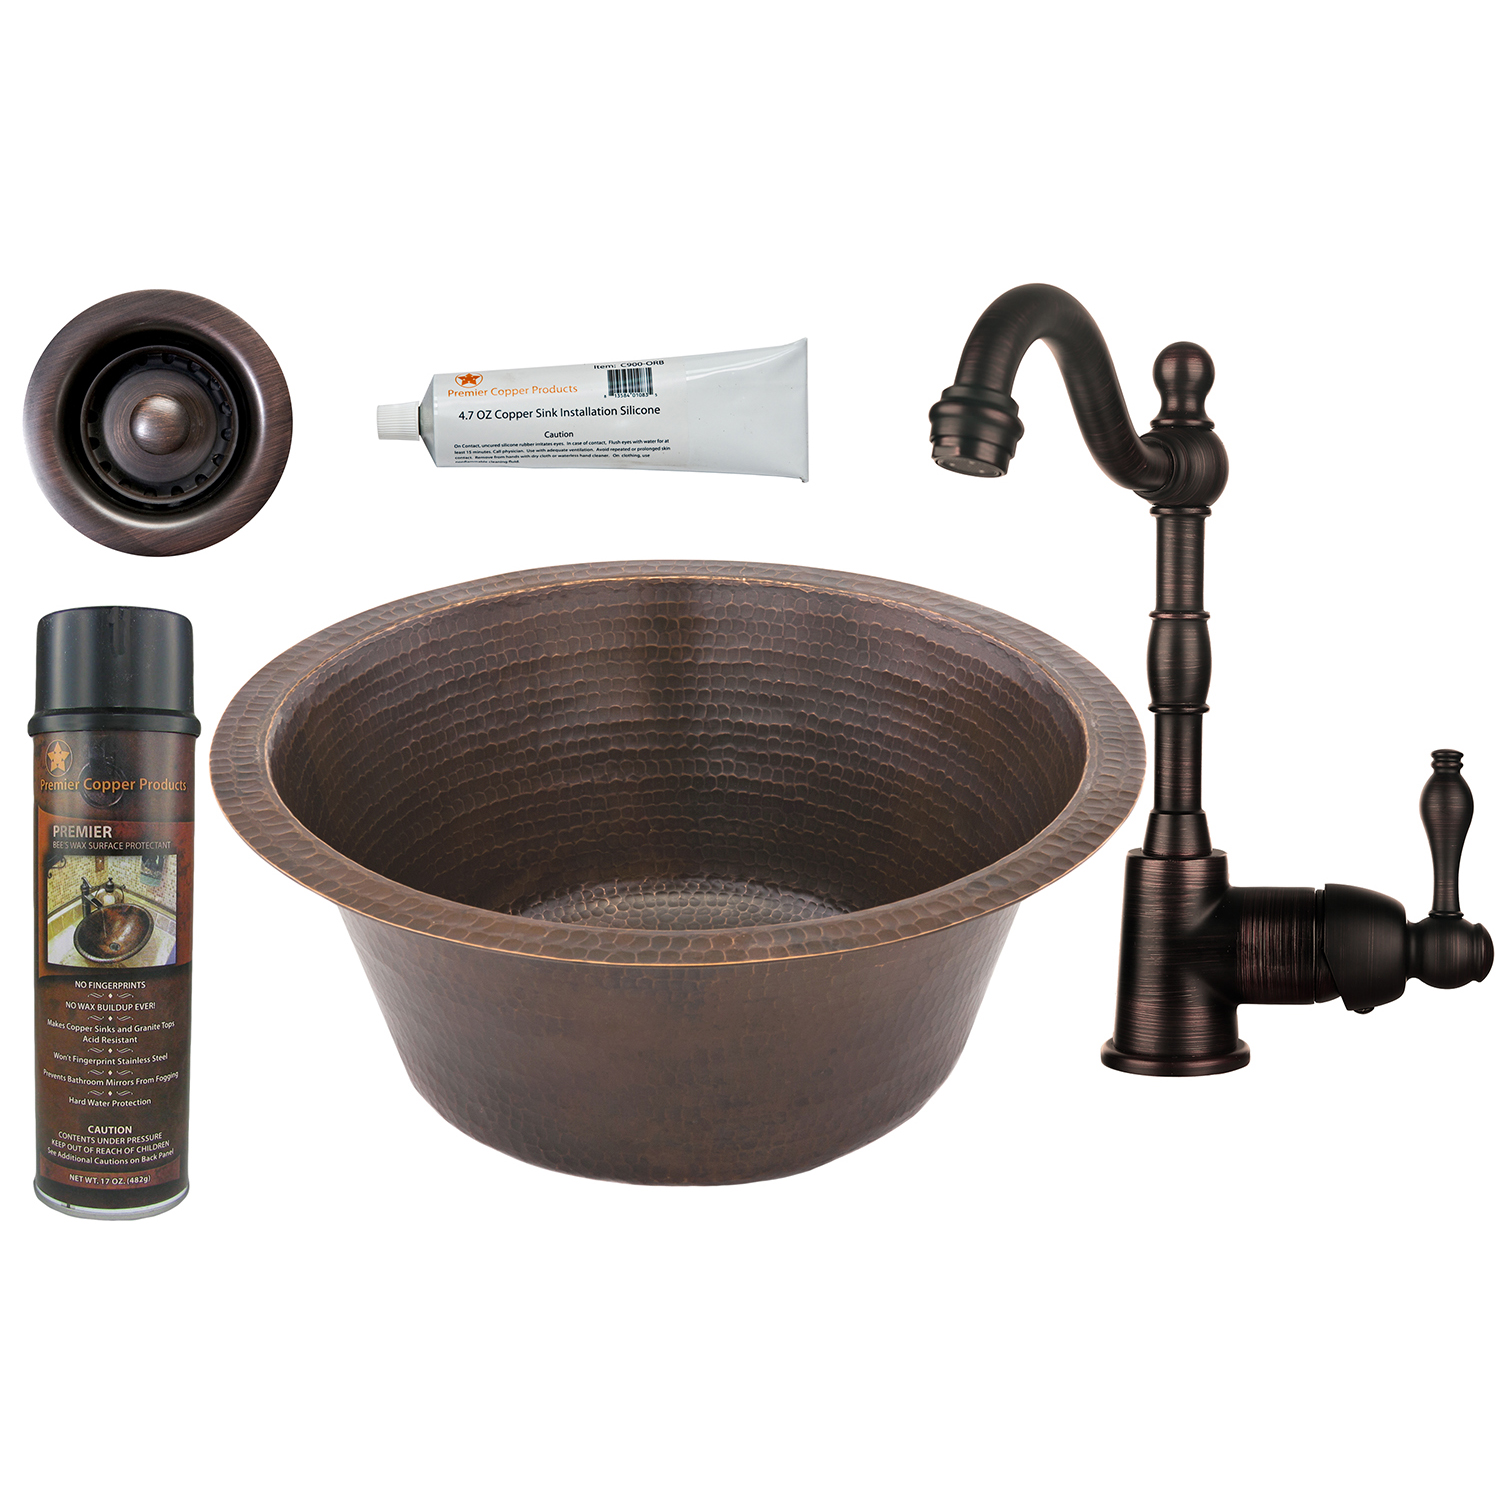 16 Inch Round Hammered Copper Bar Sink With 2 Inch Drain Size, Faucet And Accessories Package, Oil Rubbed Bronze